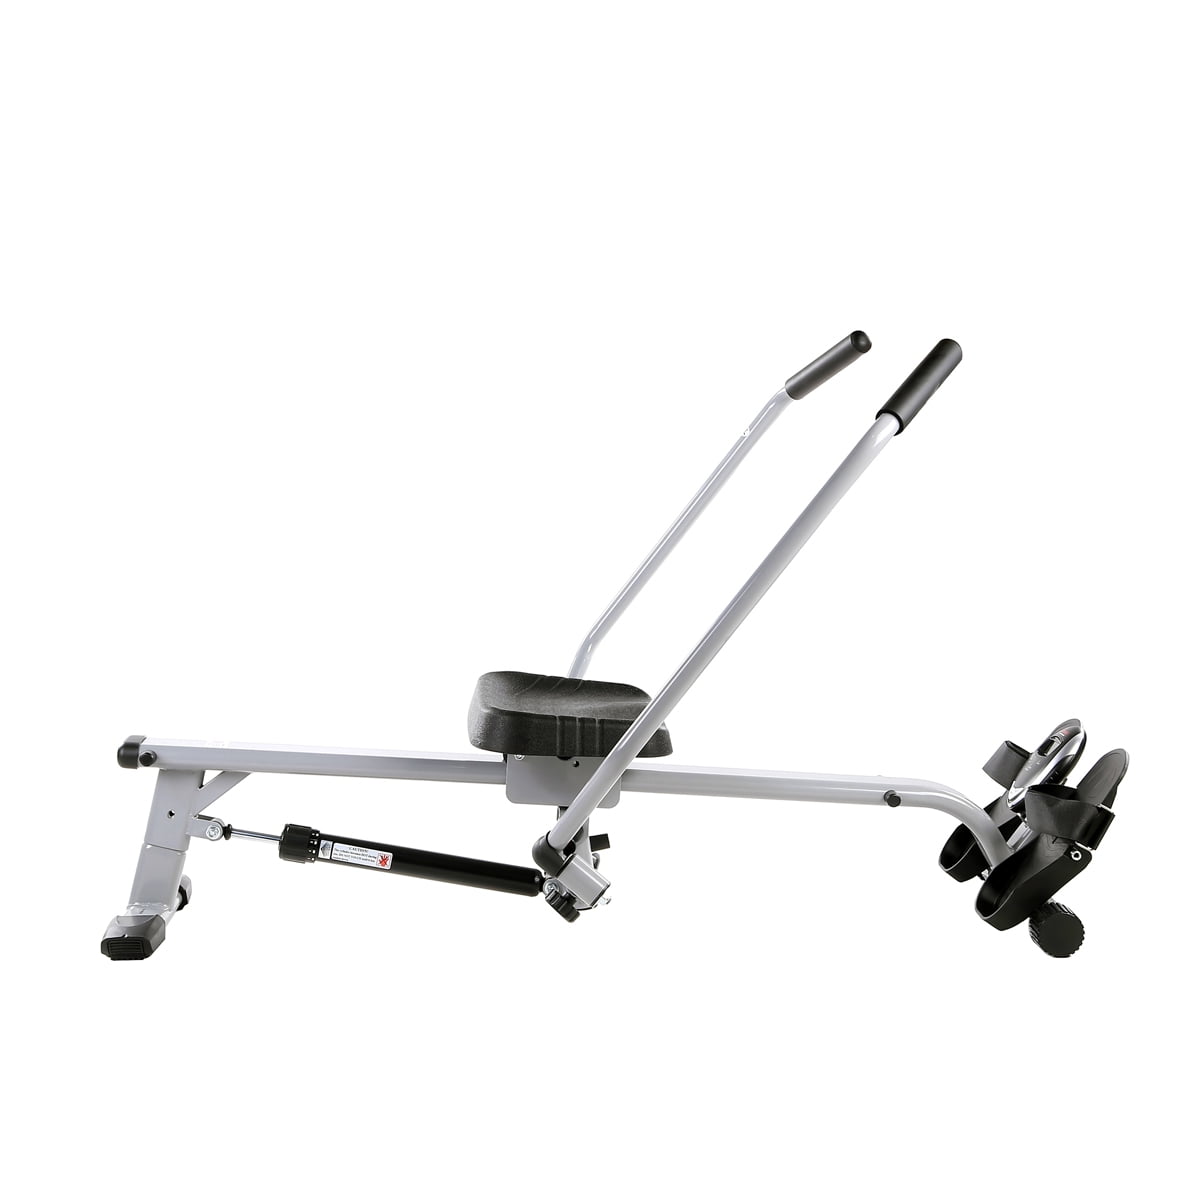 Sunny Health Fitness SFRW5639 Full Motion Rowing Machine for sale online 